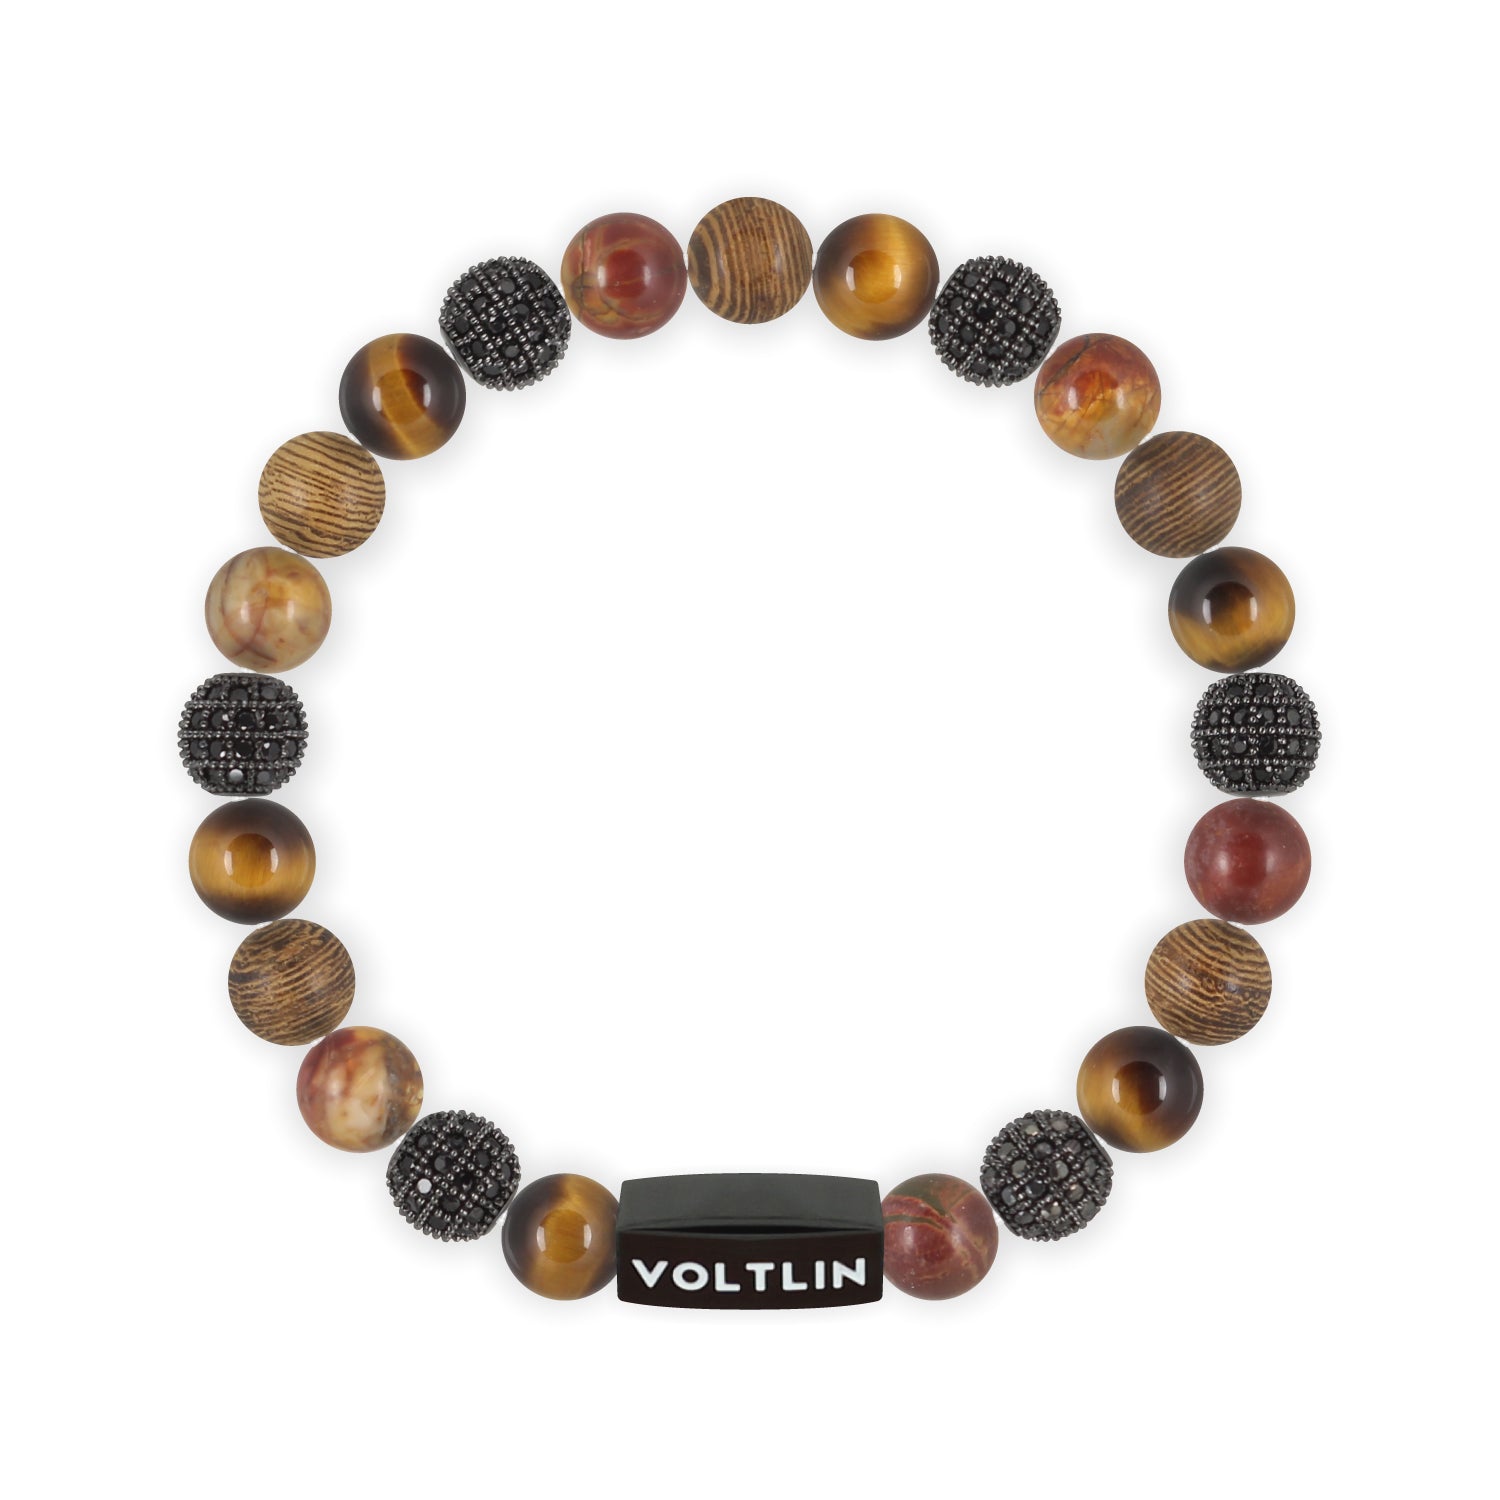 Front view of an 8mm Umber Sirius beaded stretch bracelet featuring Yellow Tiger’s Eye, Black Pave, Red Creek Jasper, & Wood crystal and black stainless steel logo bead made by Voltlin